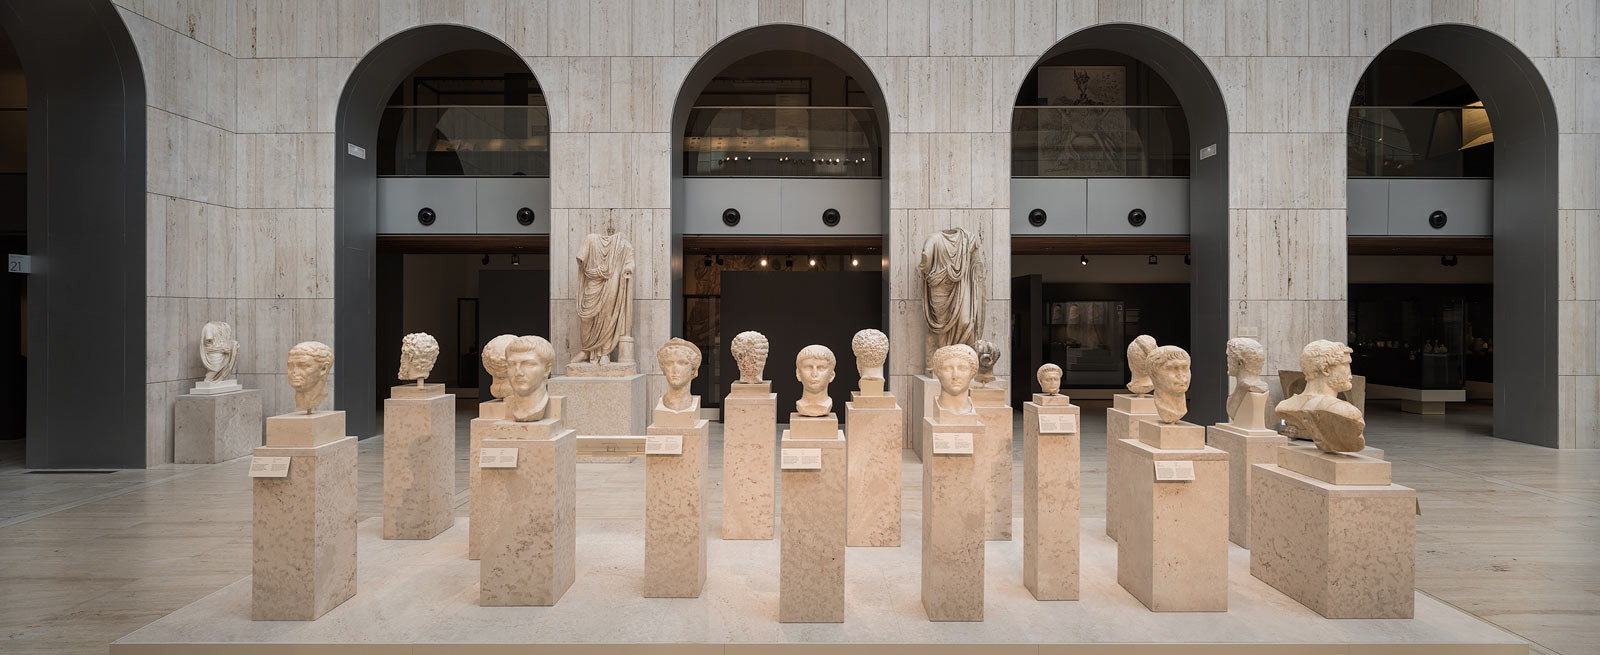 National Archaeological Museum | Sightseeing | Madrid